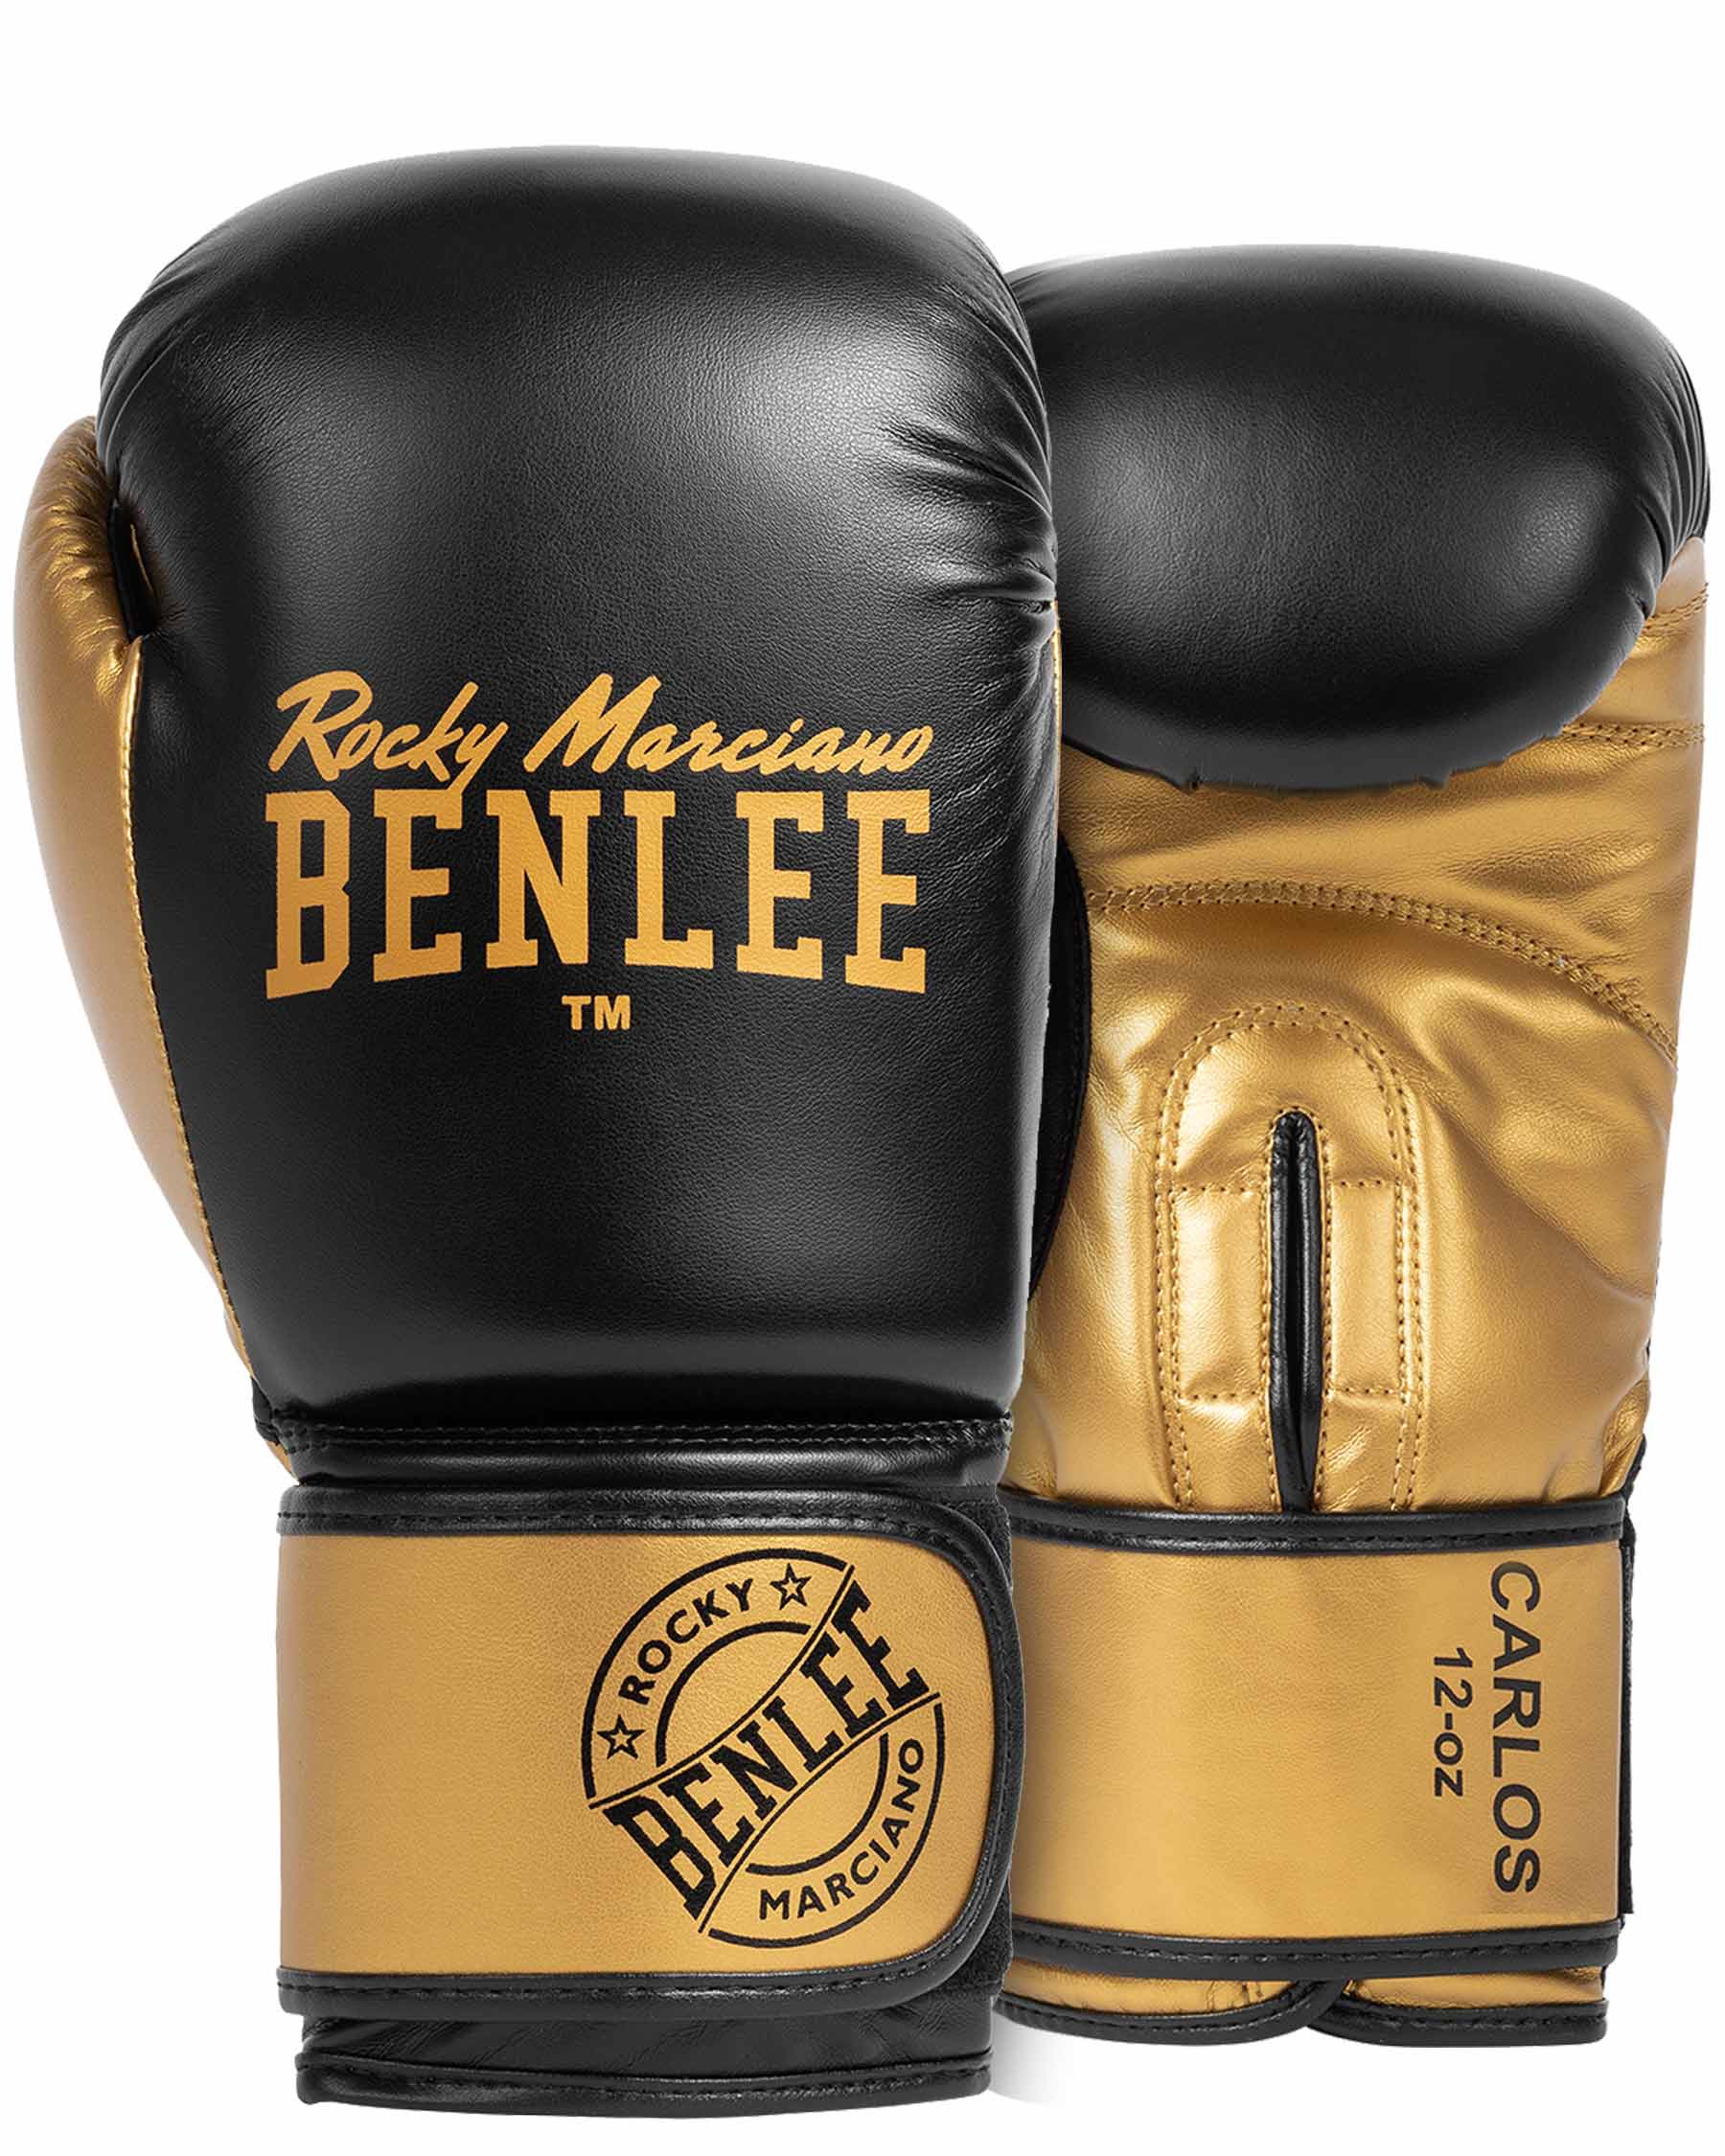 BenLee boxing gloves Carlos - Boxing gloves, training gloves and sparring  gloves - BenLee sportswear and boxing equipment